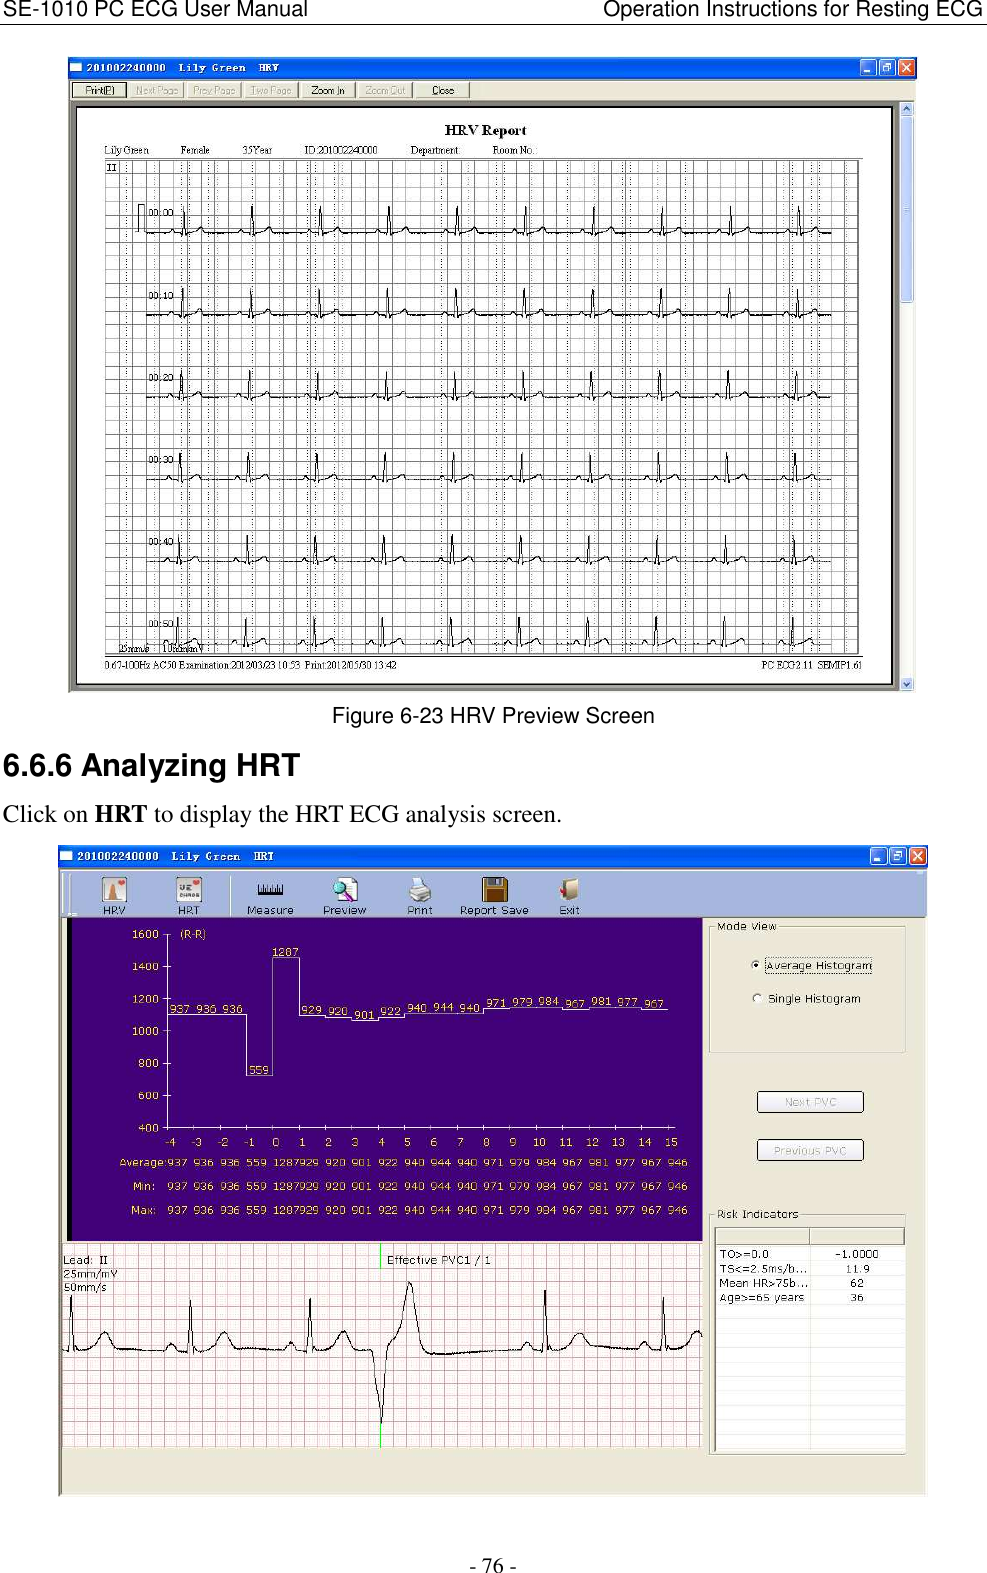 SE-1010 PC ECG User Manual                                                      Operation Instructions for Resting ECG - 76 -  Figure 6-23 HRV Preview Screen 6.6.6 Analyzing HRT Click on HRT to display the HRT ECG analysis screen.    